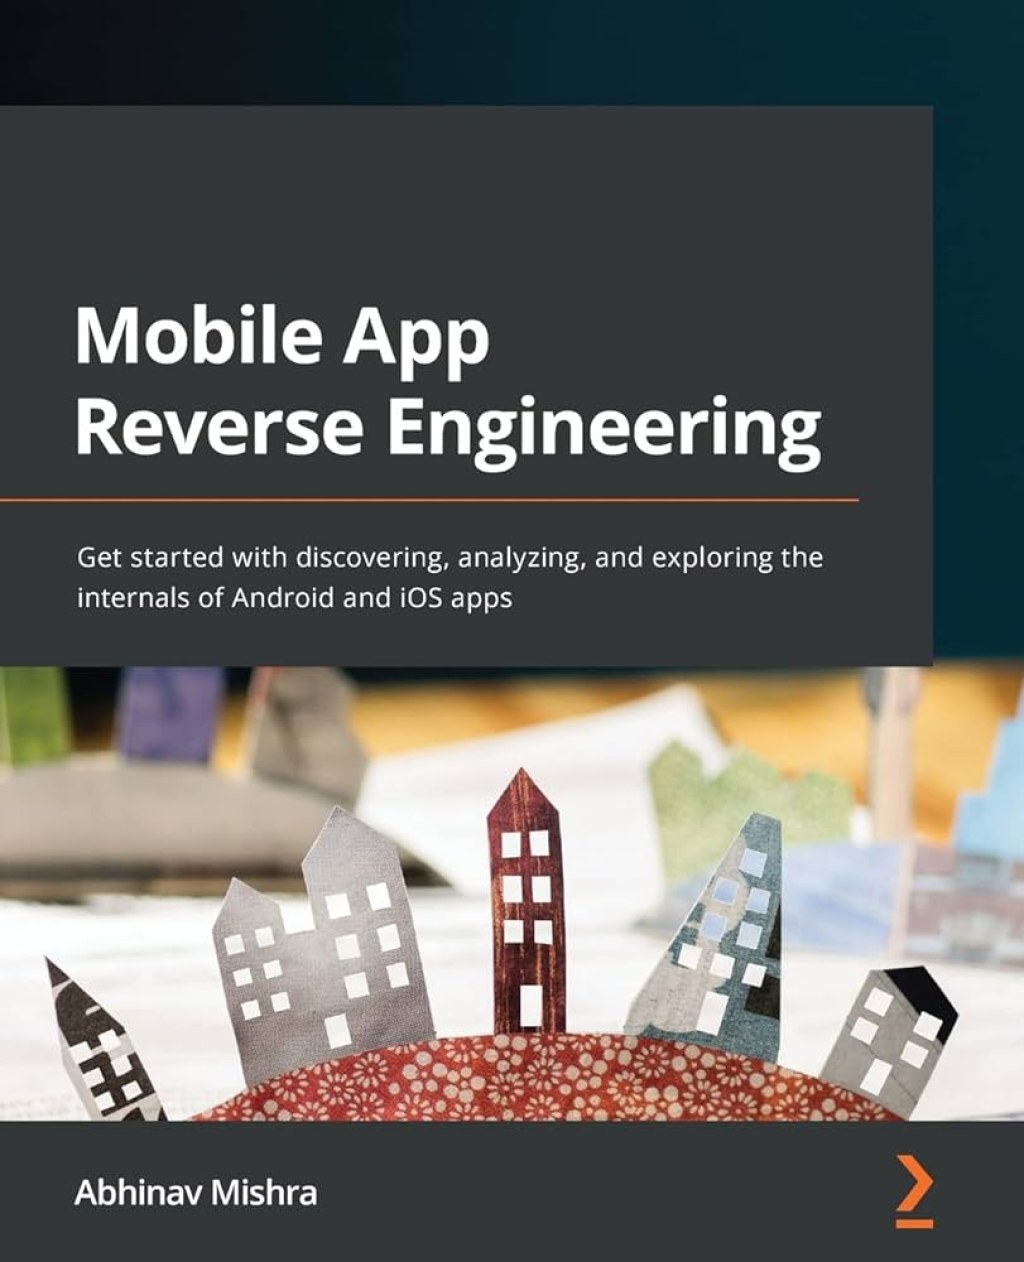 mobile app reverse engineering - Mobile App Reverse Engineering: Get started with discovering